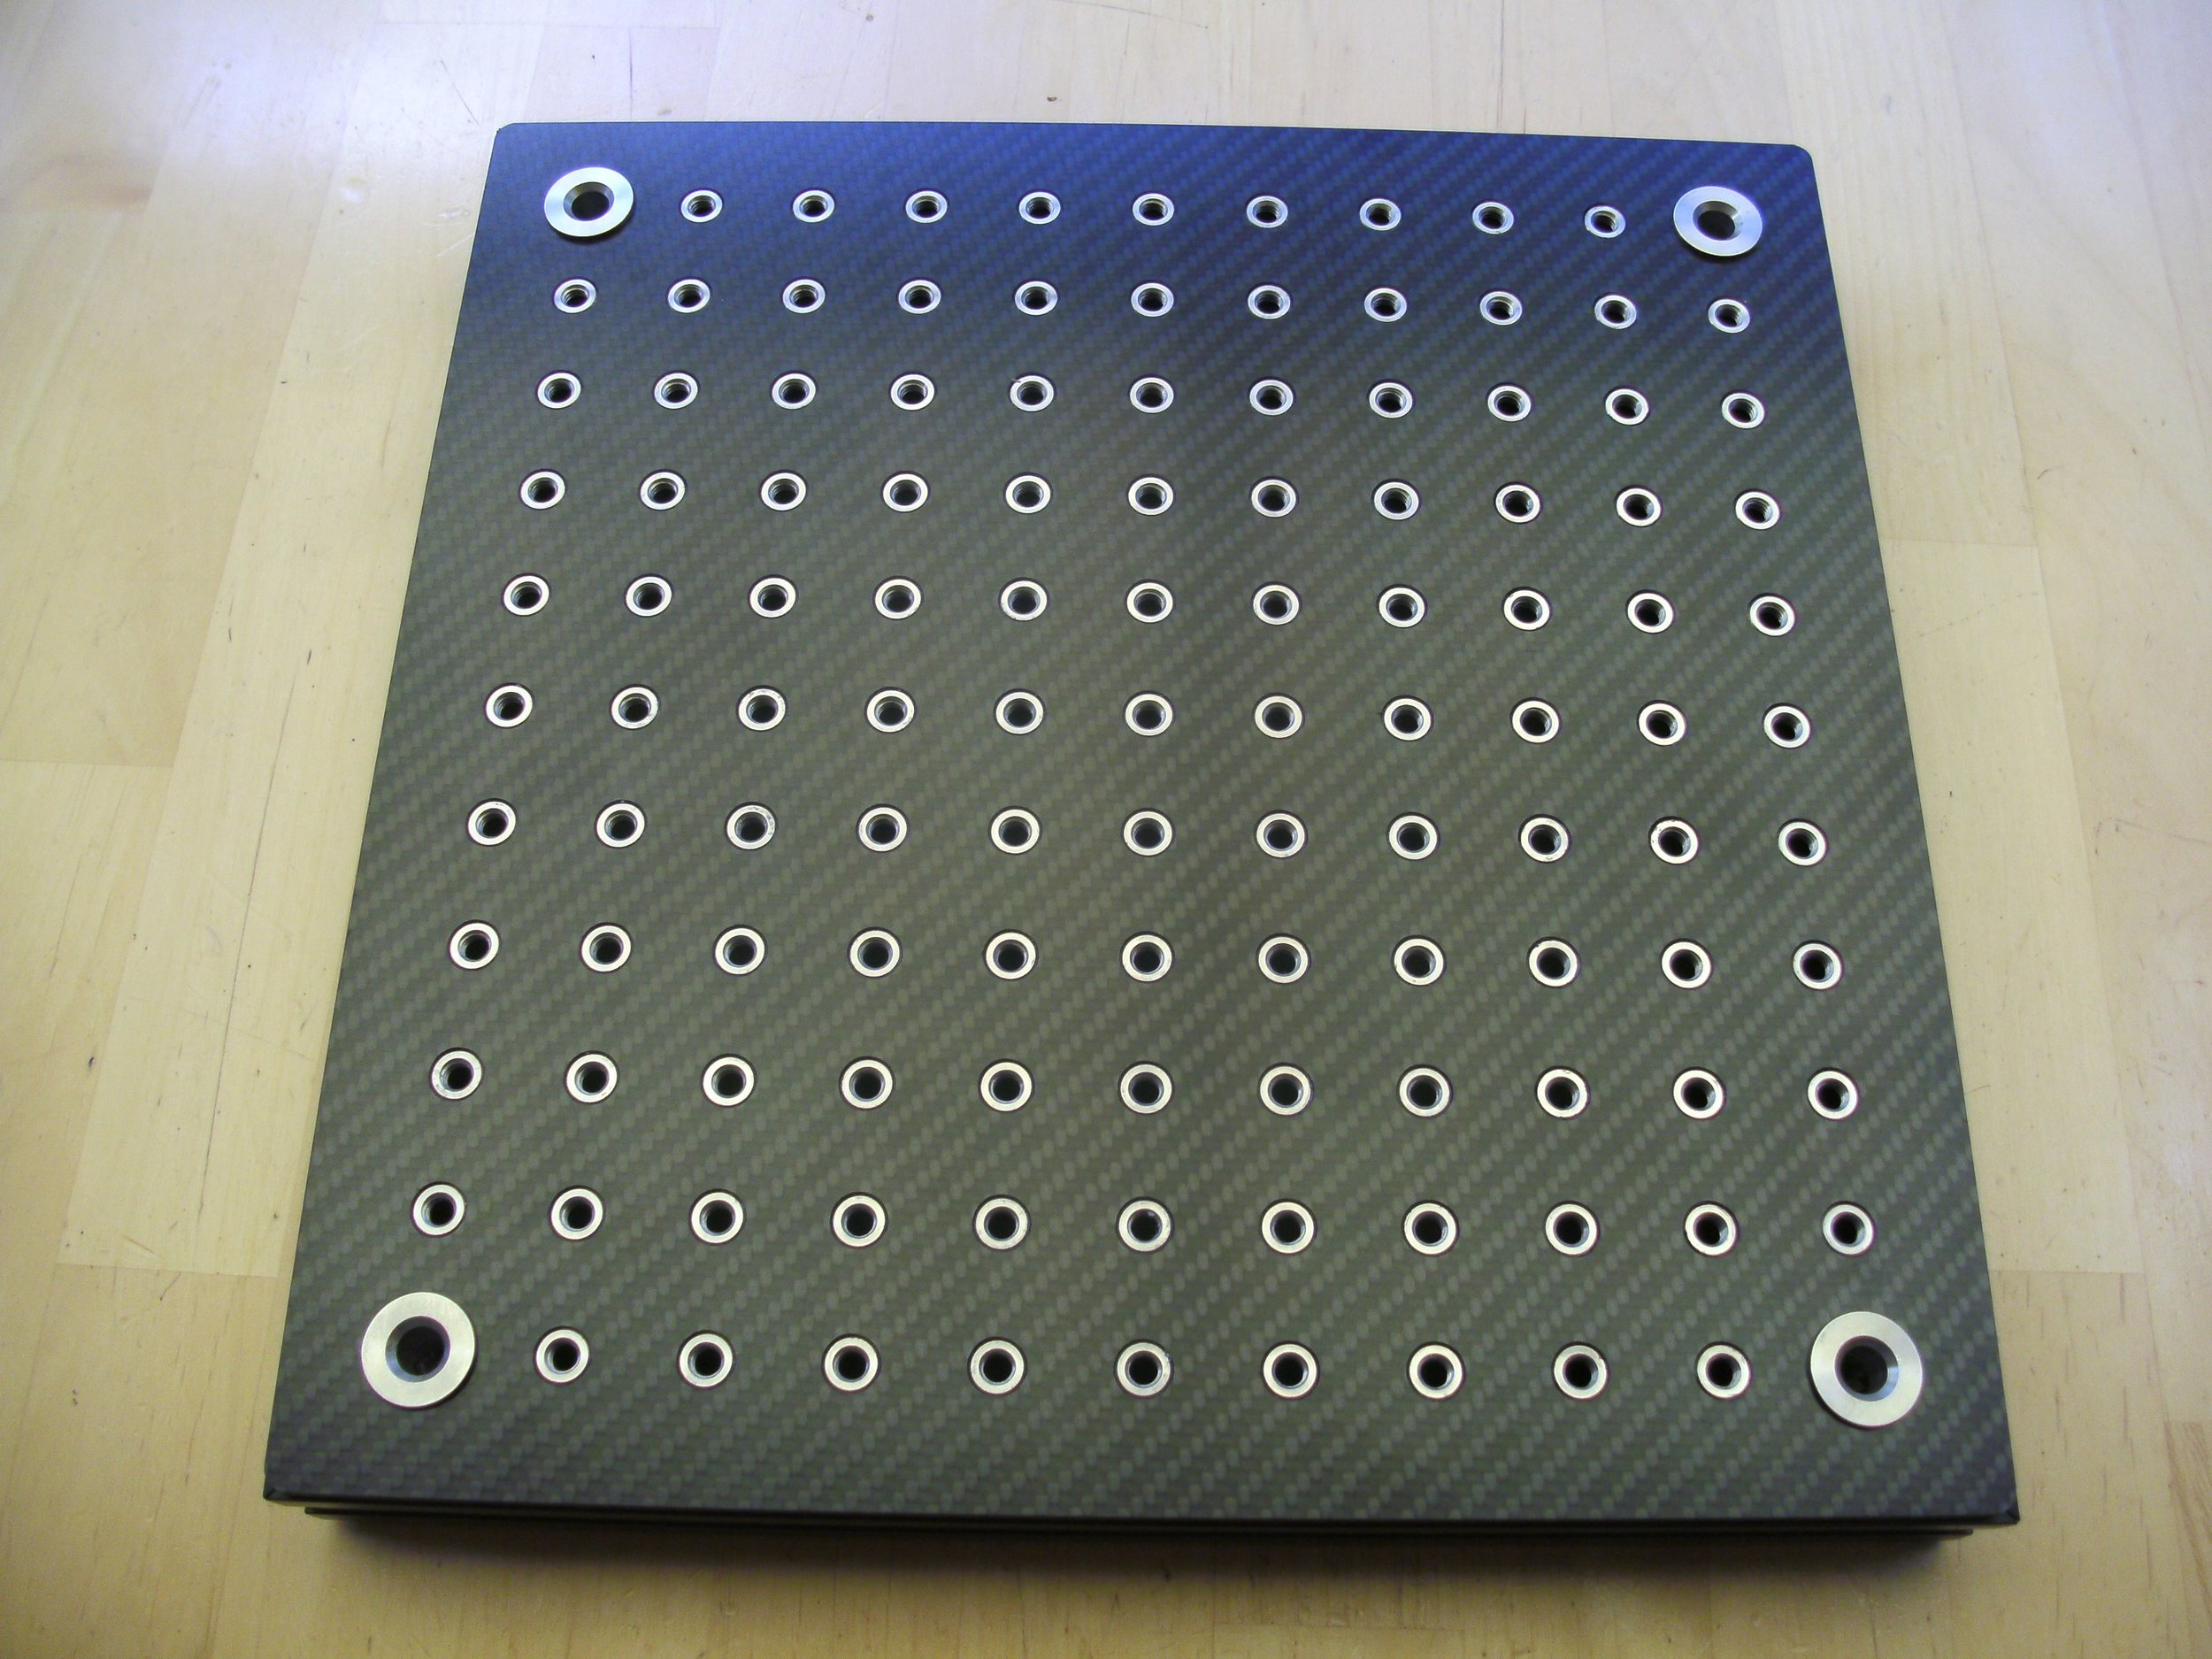 Board with 25 mm pitch